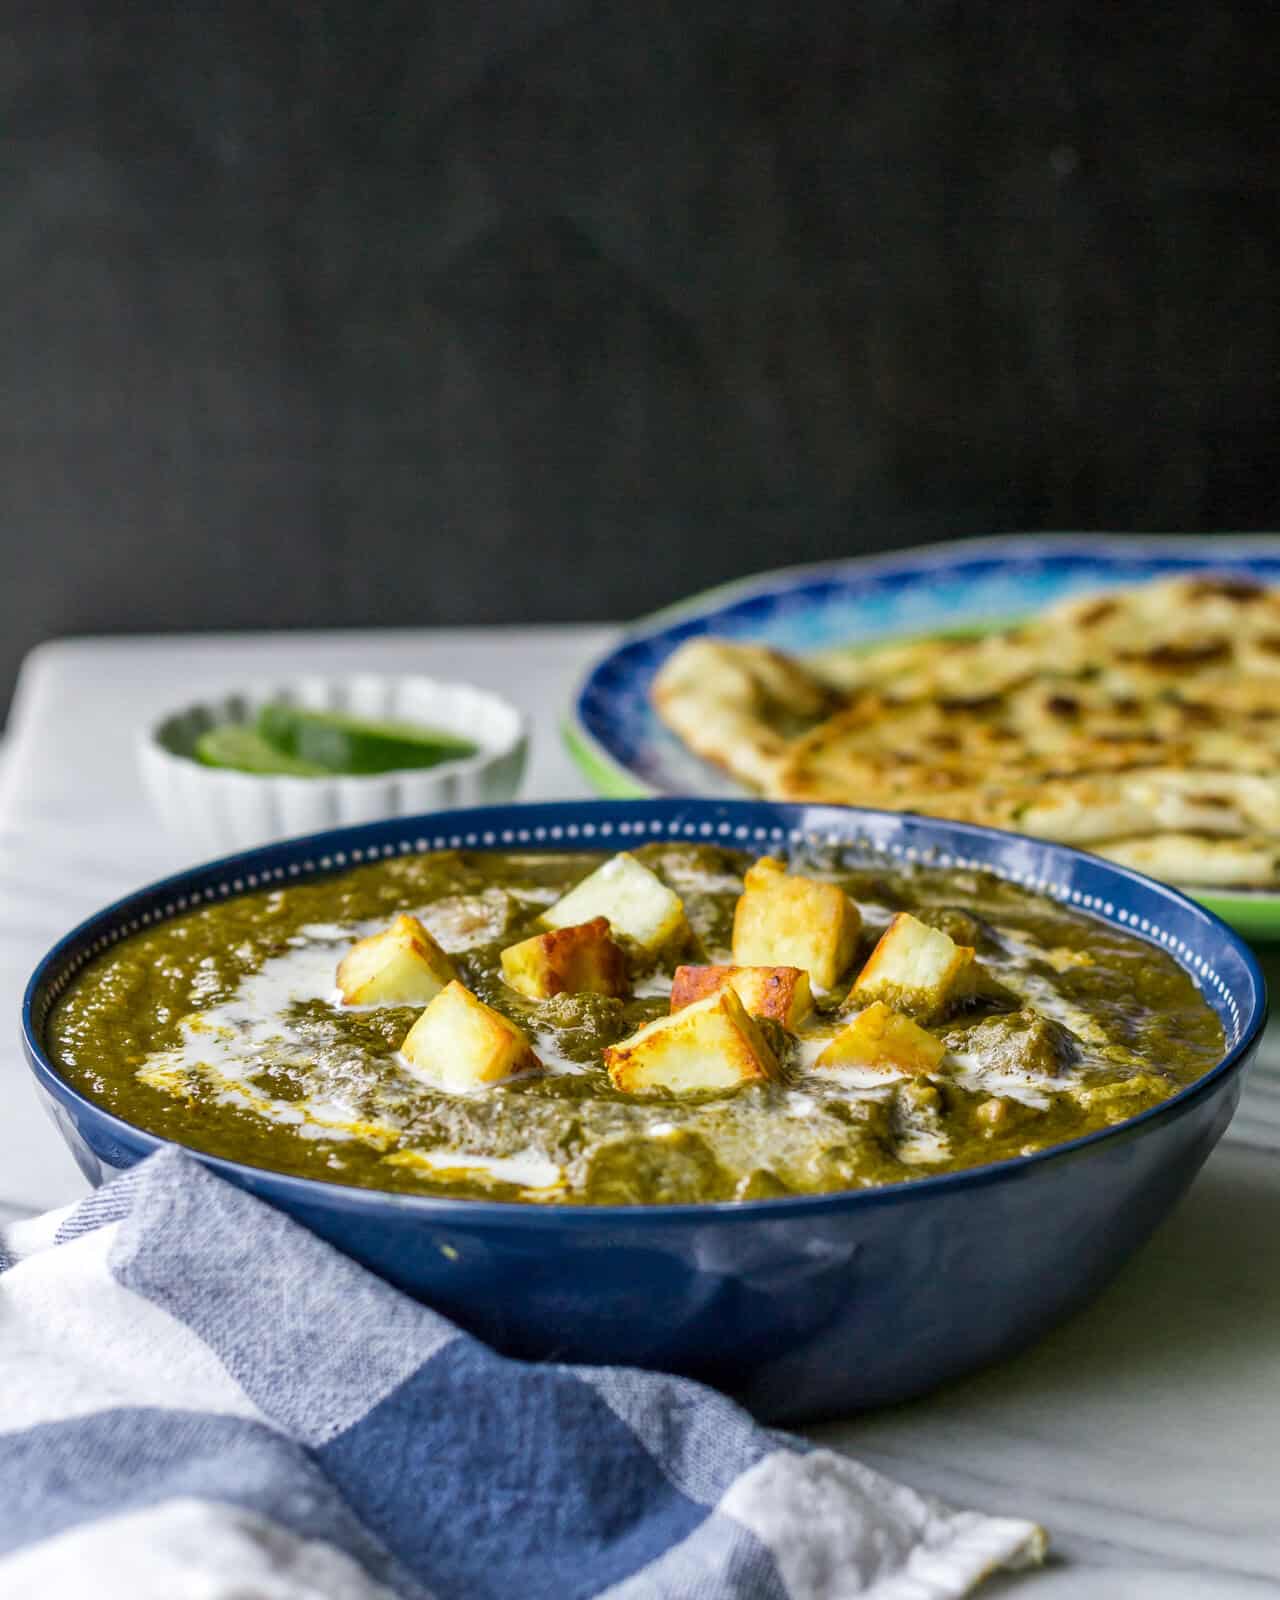 Restaurant style Palak Paneer served in a blue bowl with naan and lemon on the side